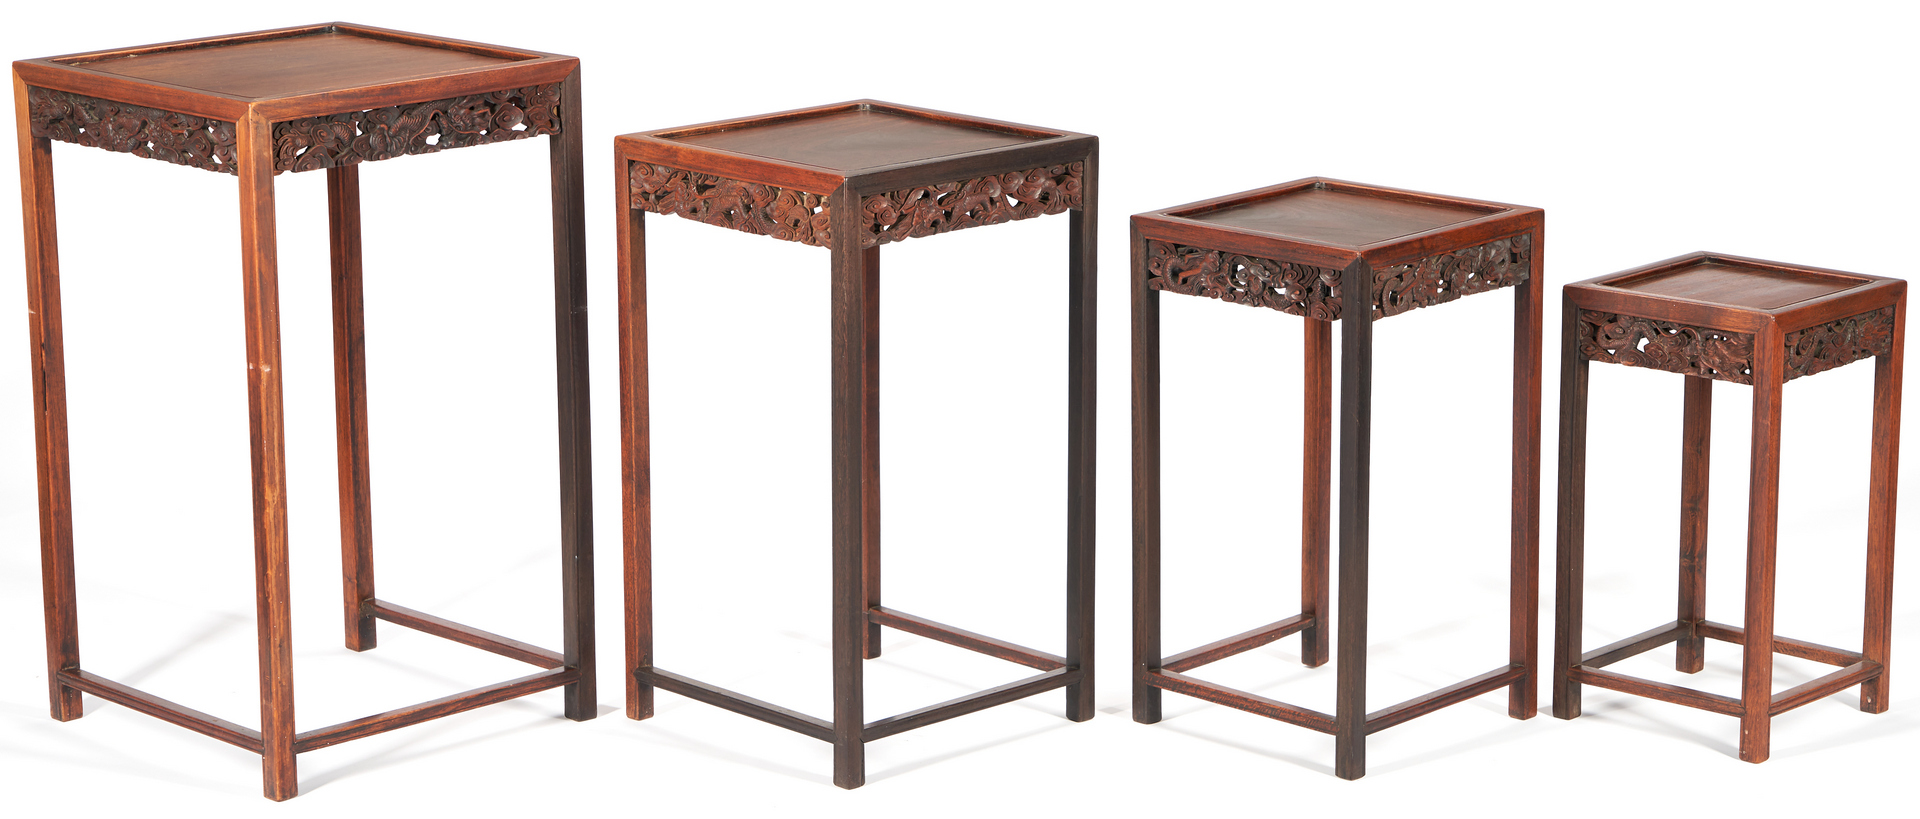 Lot 50: Chinese Hardwood Tables, incl. Nesting Tables, 5 items